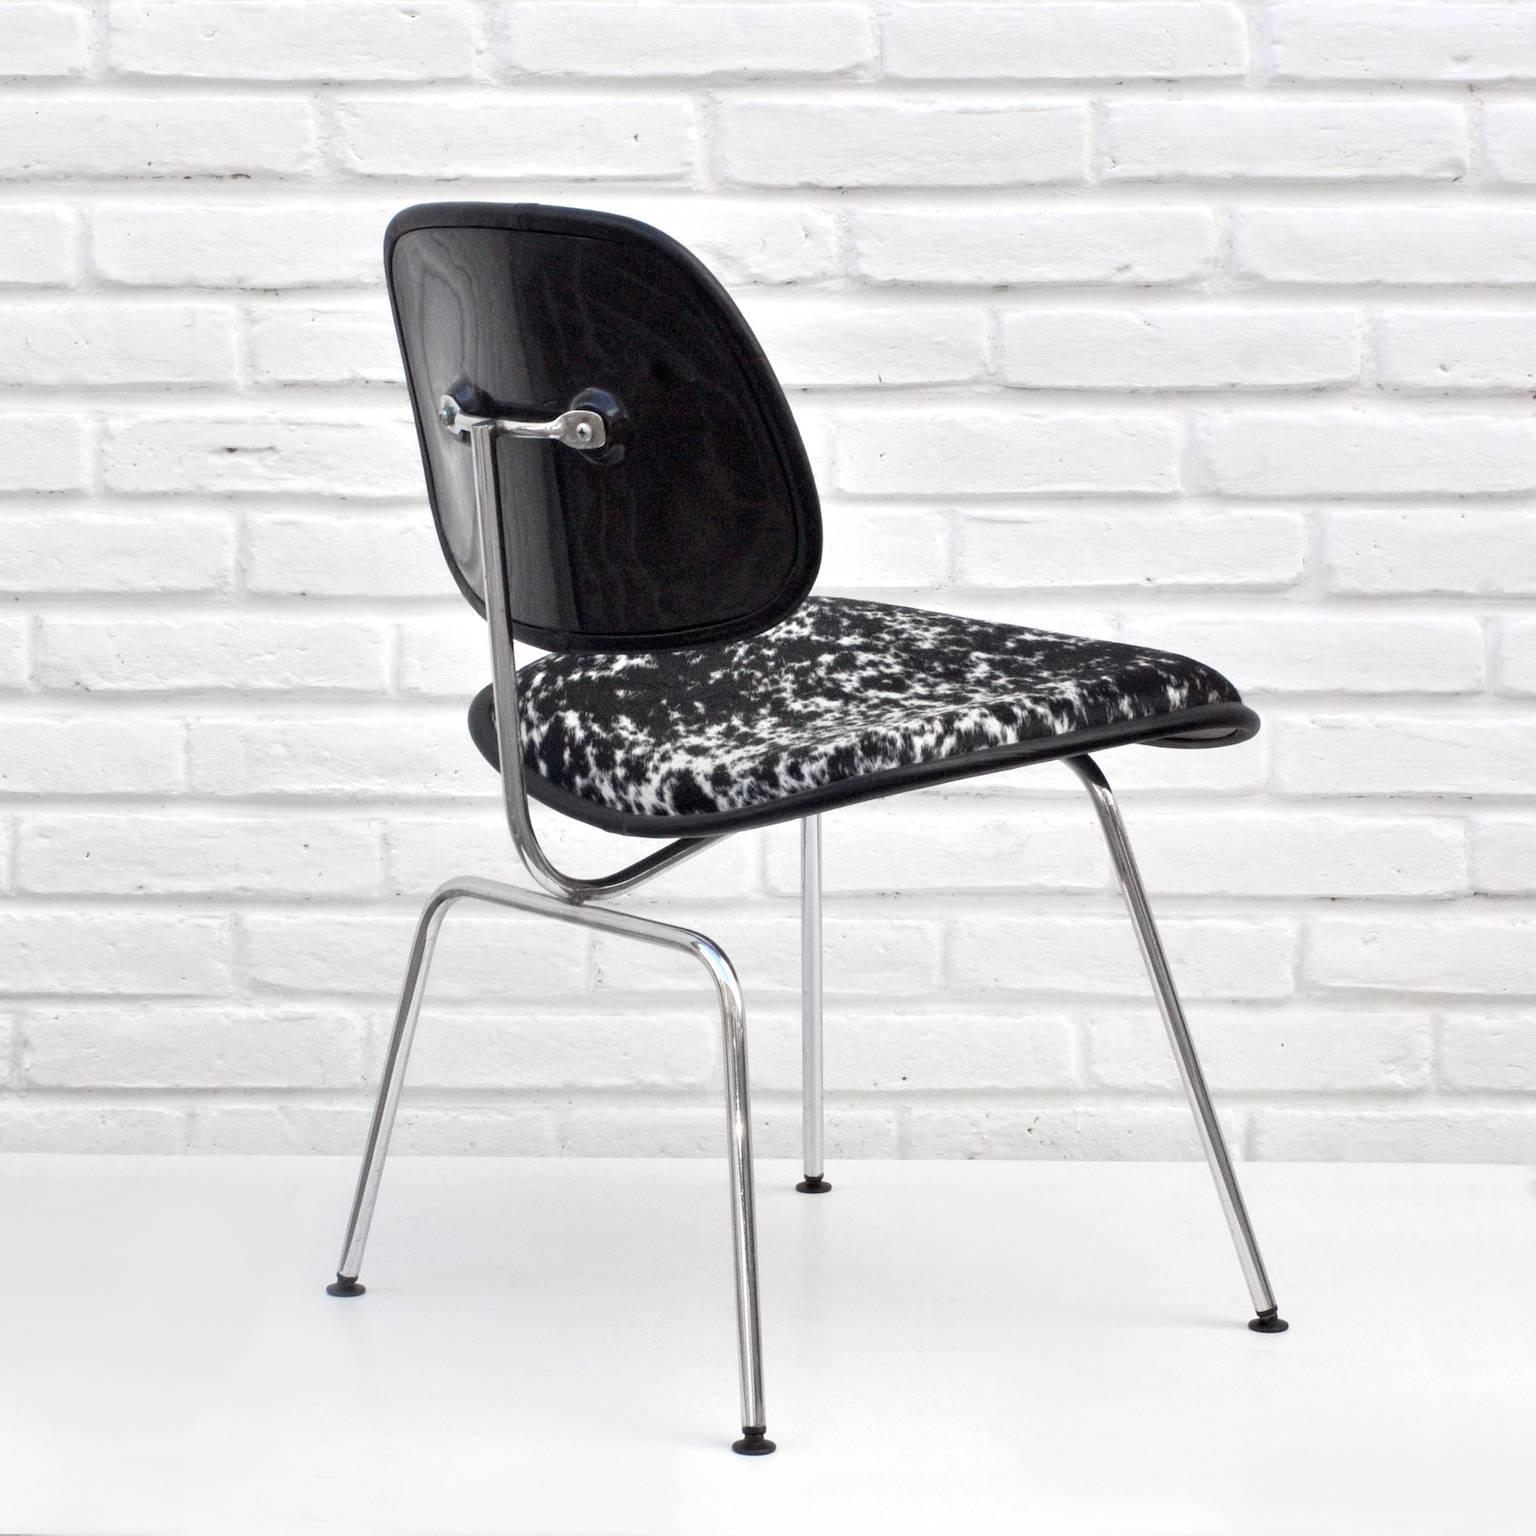 A classic DCM chair designed by Charles and Ray Eames for Herman Miller. The chair is upholstered in black and white cowhide with black leather trim, a steel body and black feet.

Chair is marked underneath.